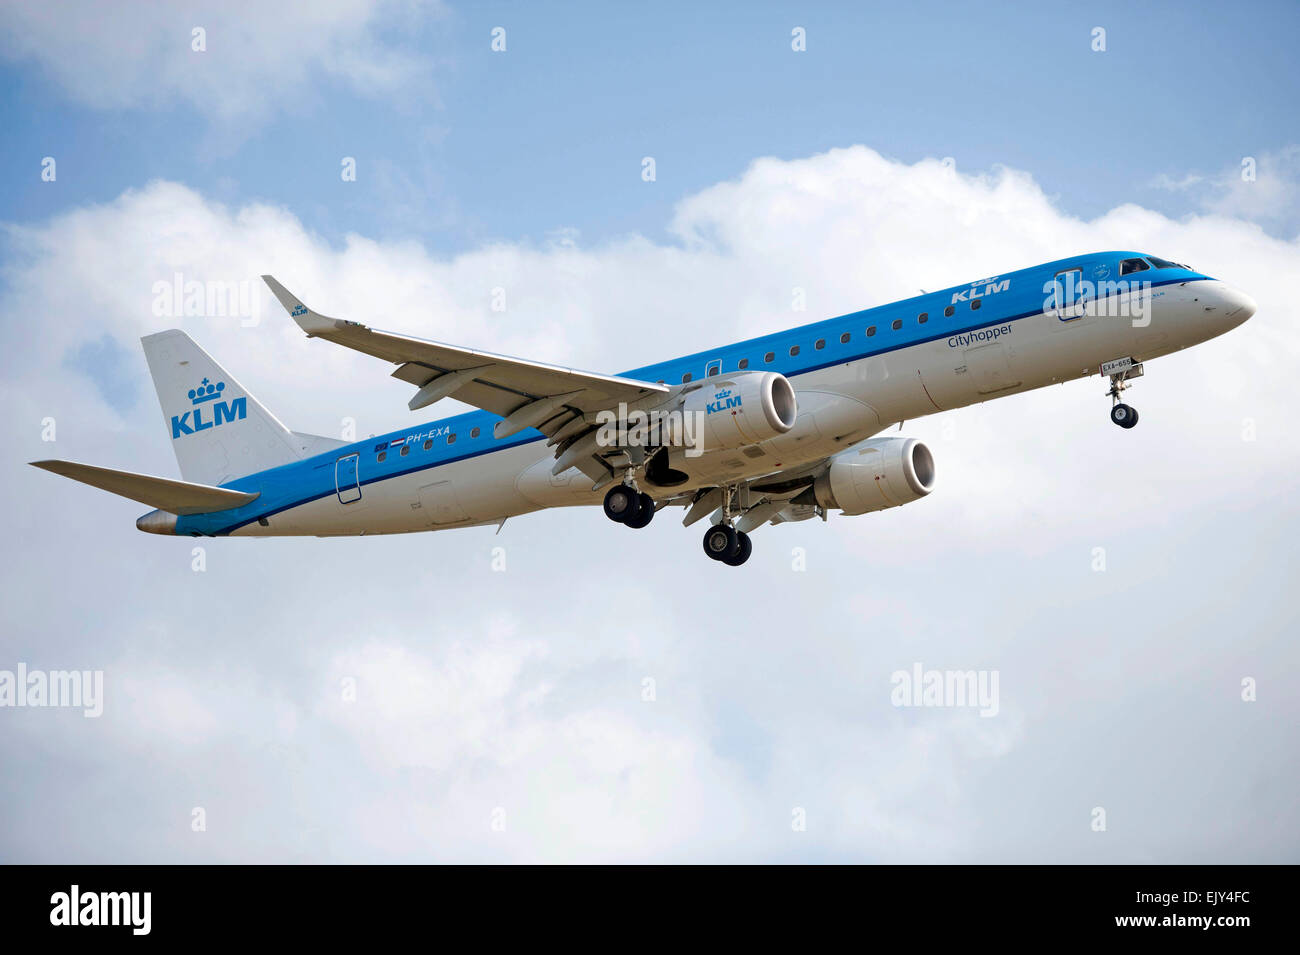 KLM Cityhopper plane from Amsterdam about to land at Bristol Airport in England, UK. Stock Photo